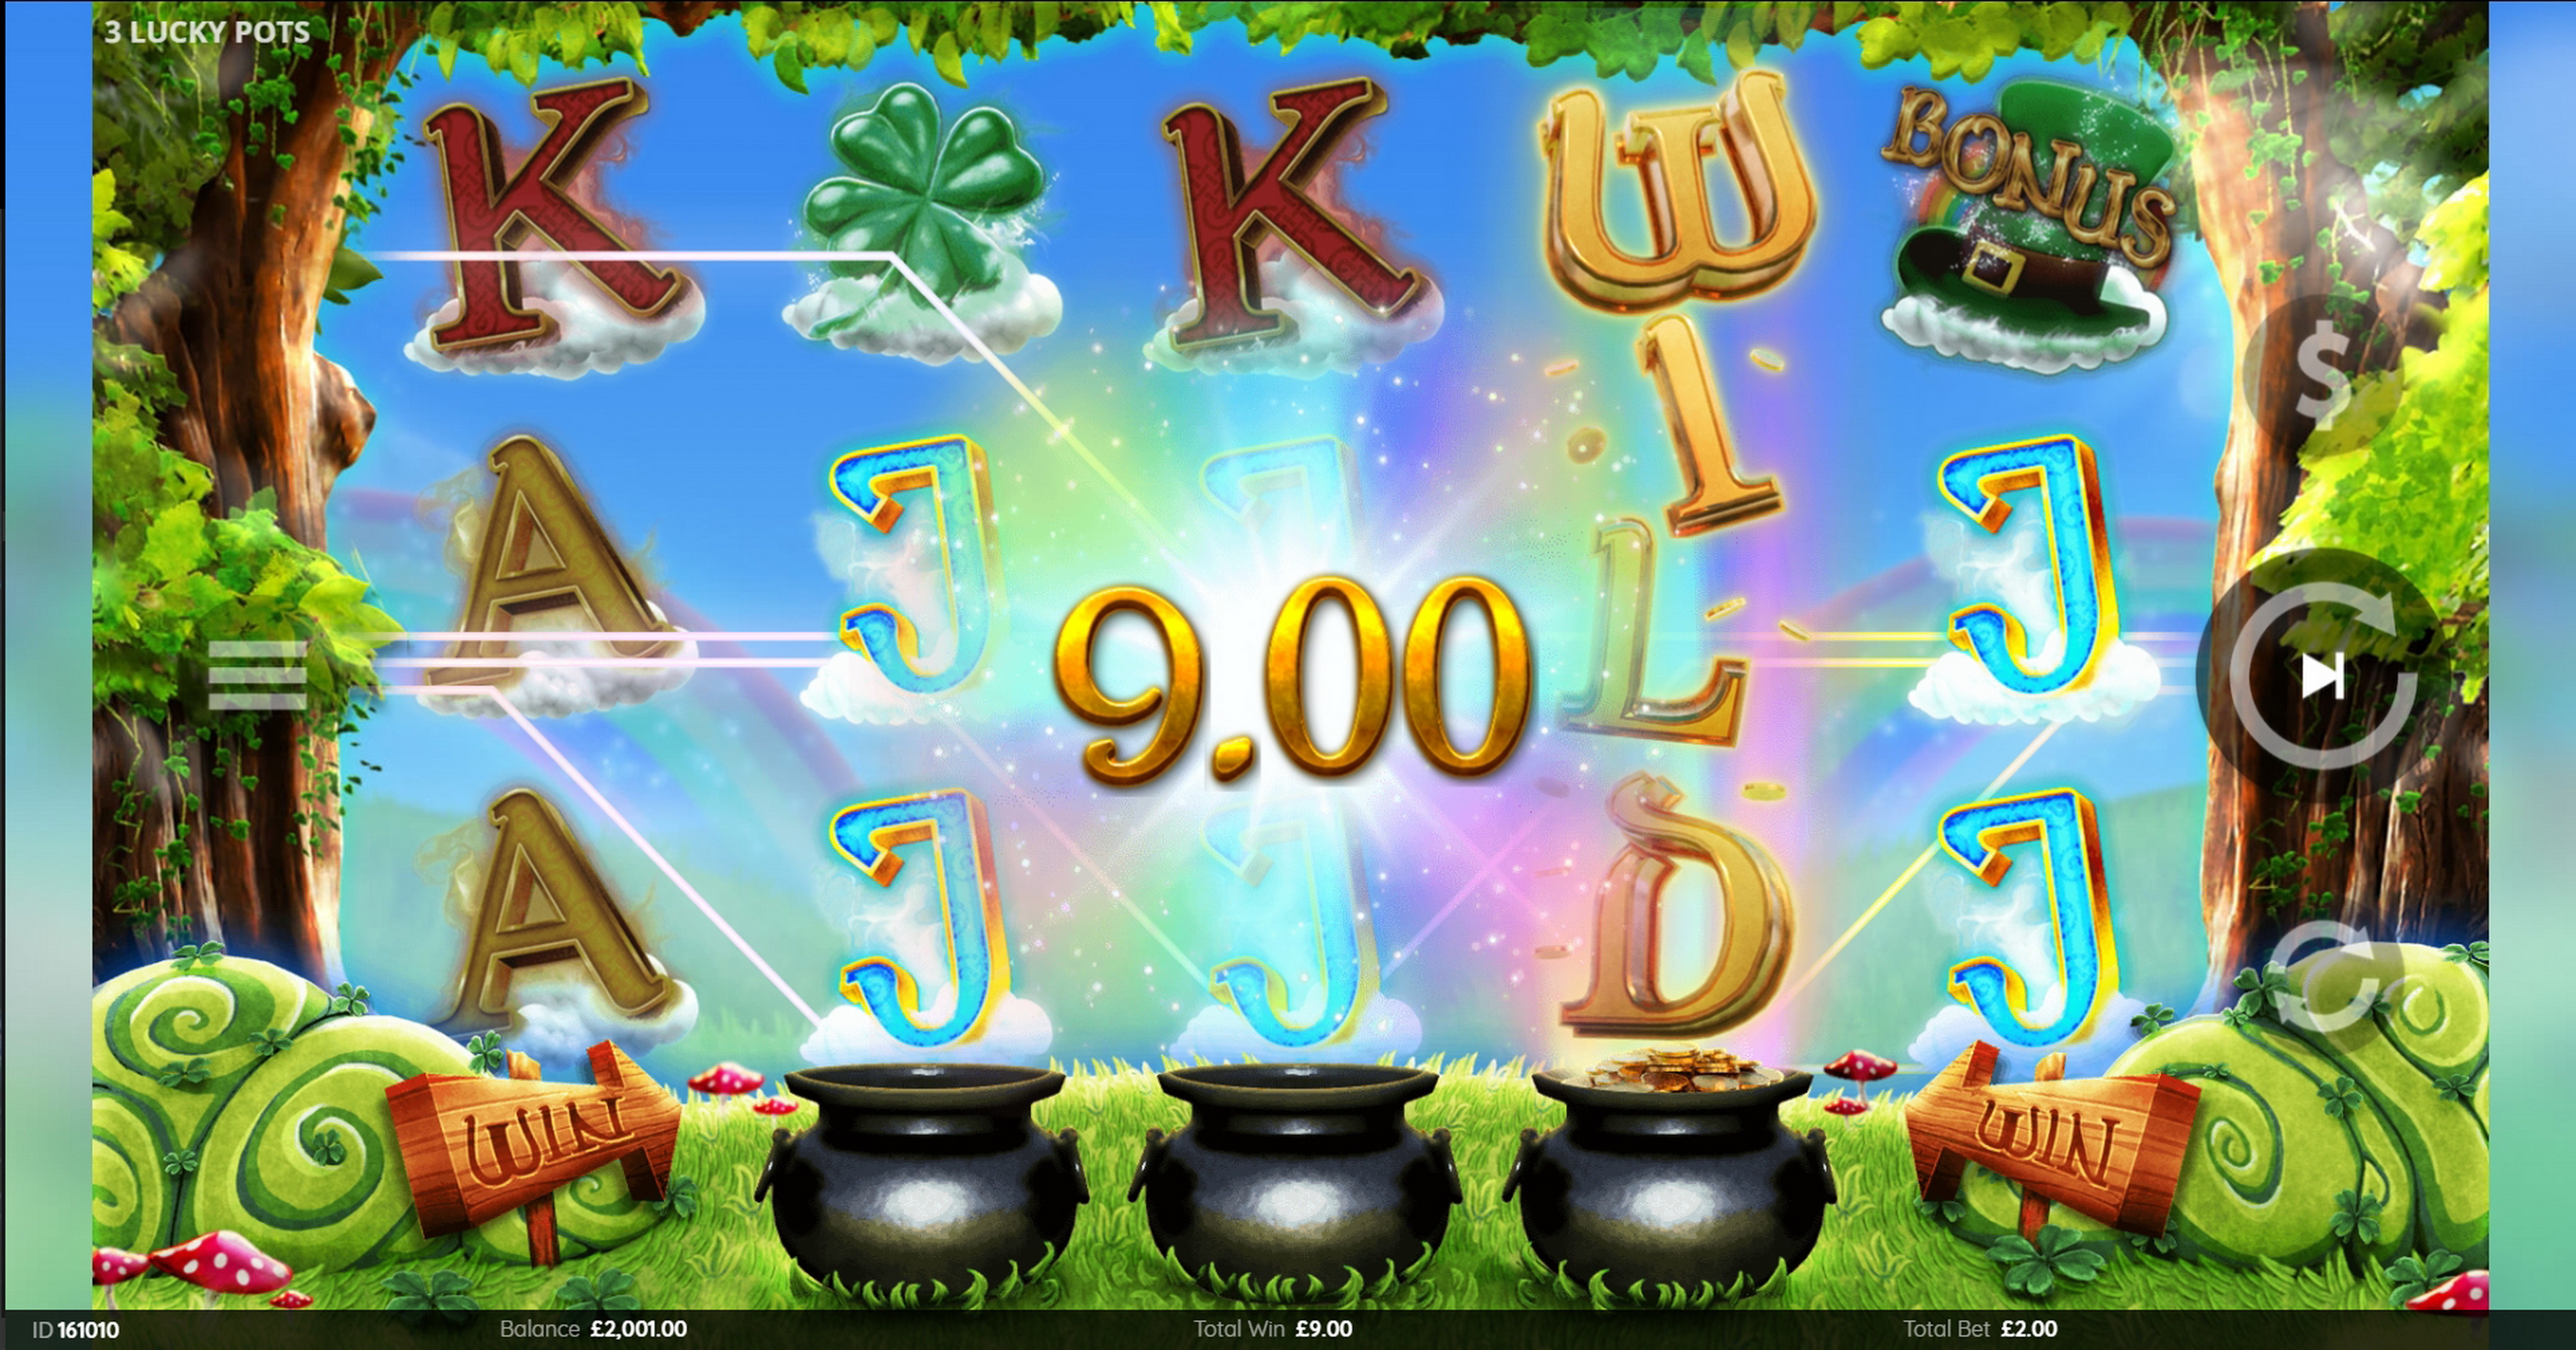 Win Money in 3 Lucky Pots Free Slot Game by Endemol Games